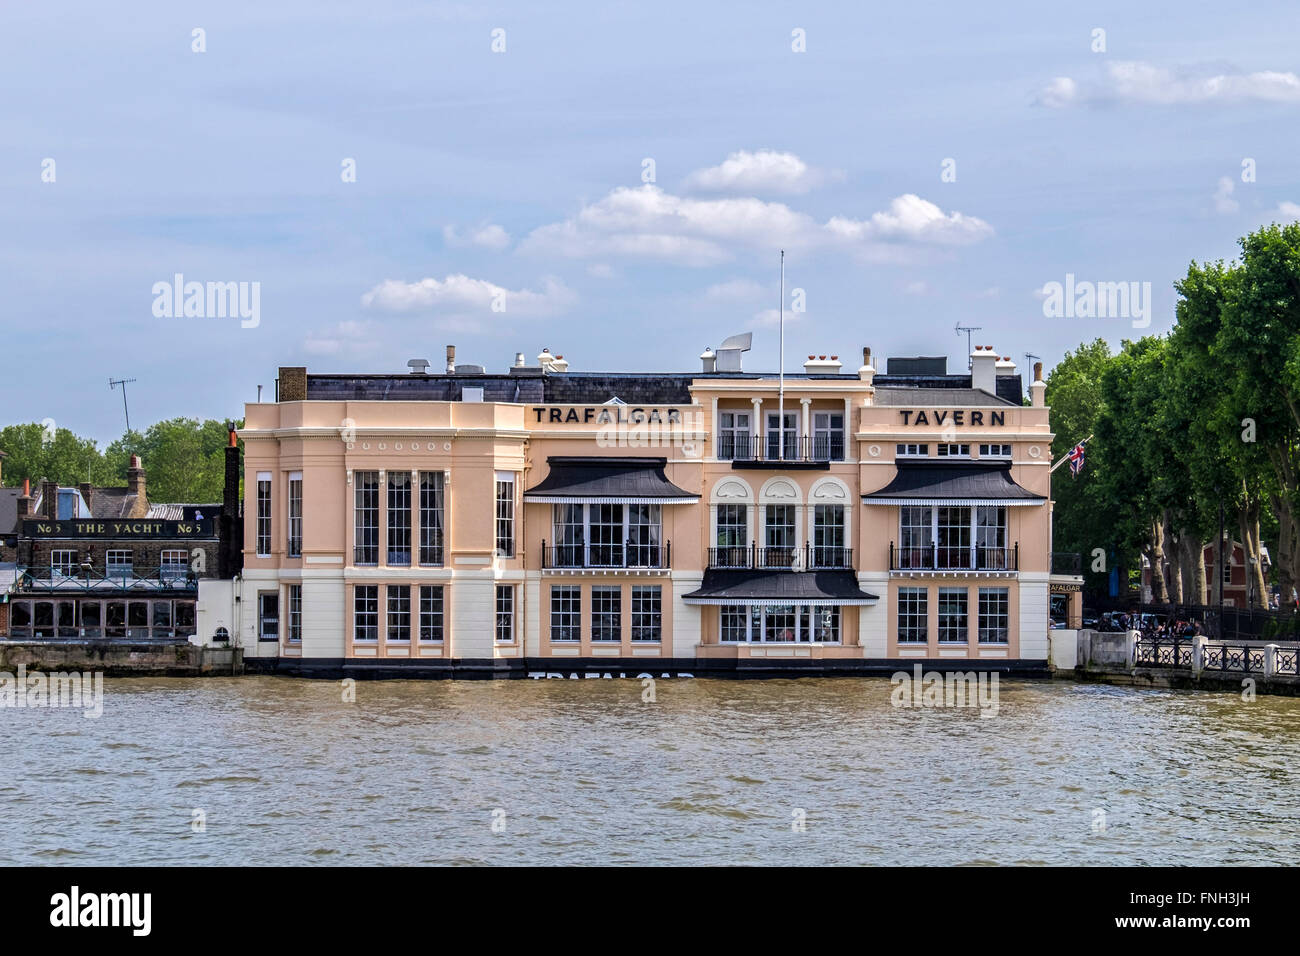 Trafalgar Tavern and The Yacht, Historic traditional riverside pubs and high tide. London, Greenwich Stock Photo